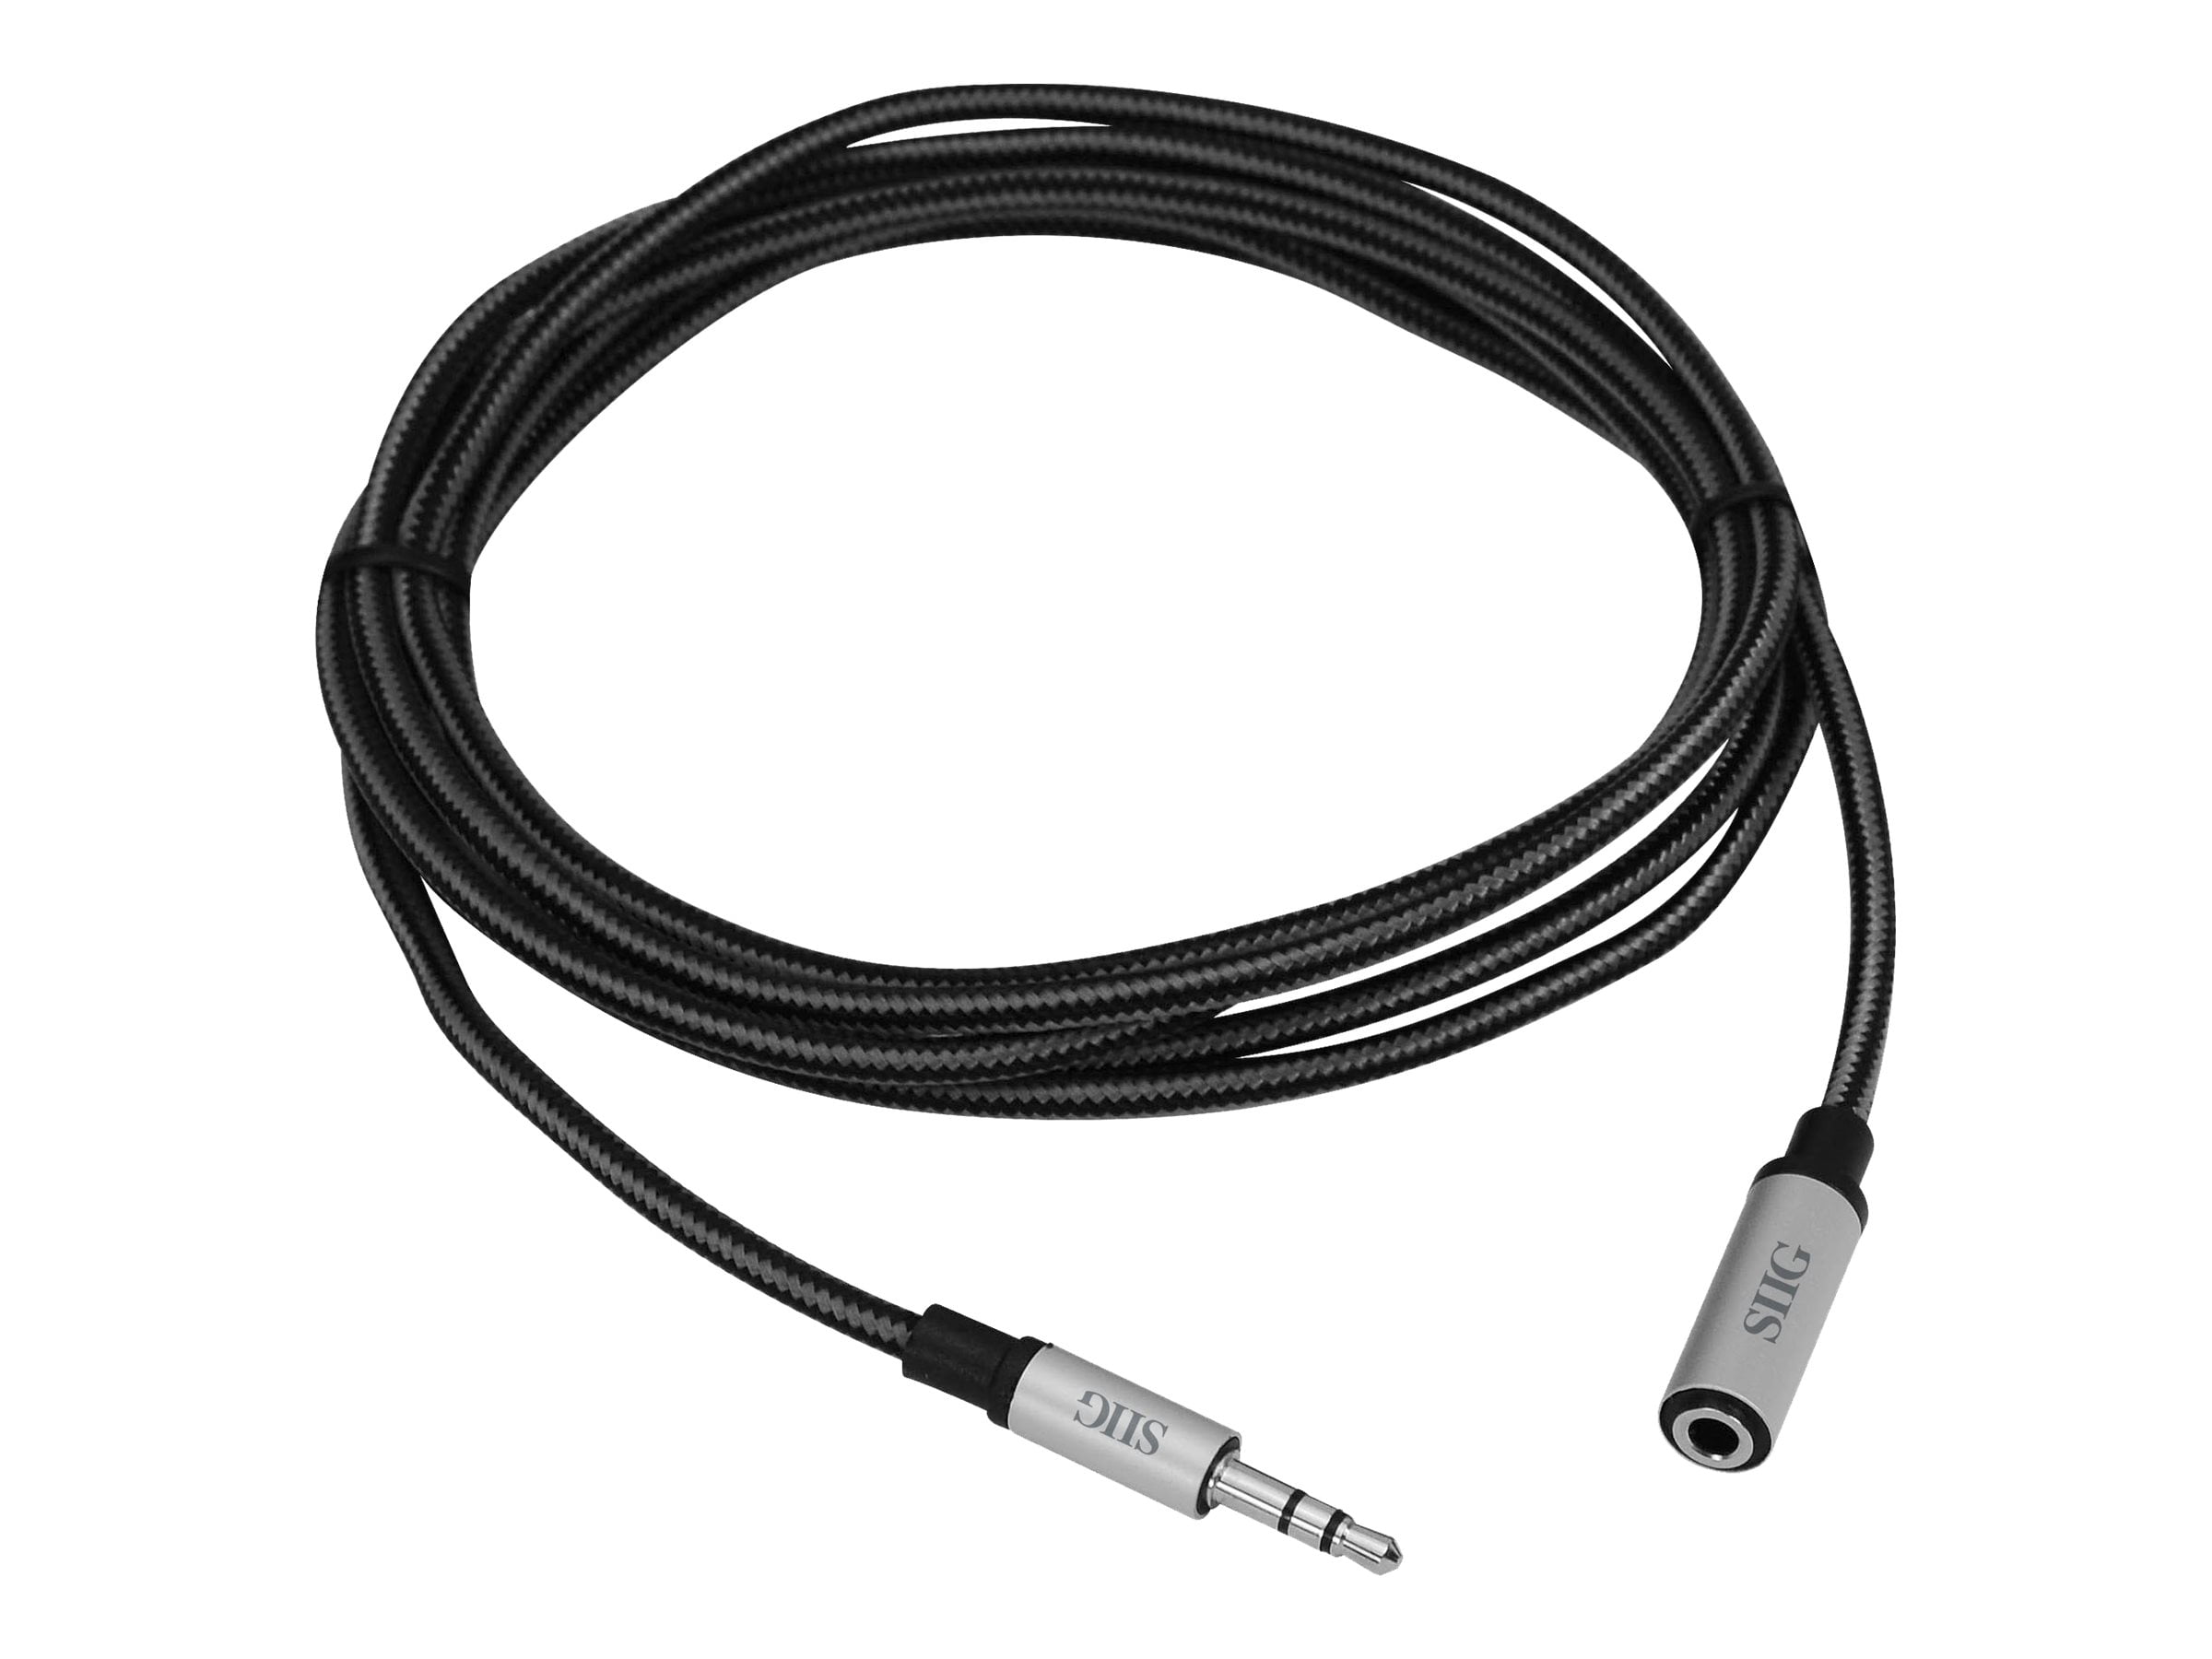 3m Fabric Braided Audio Extension Wire Male to Male Jack Cable for Samsung 